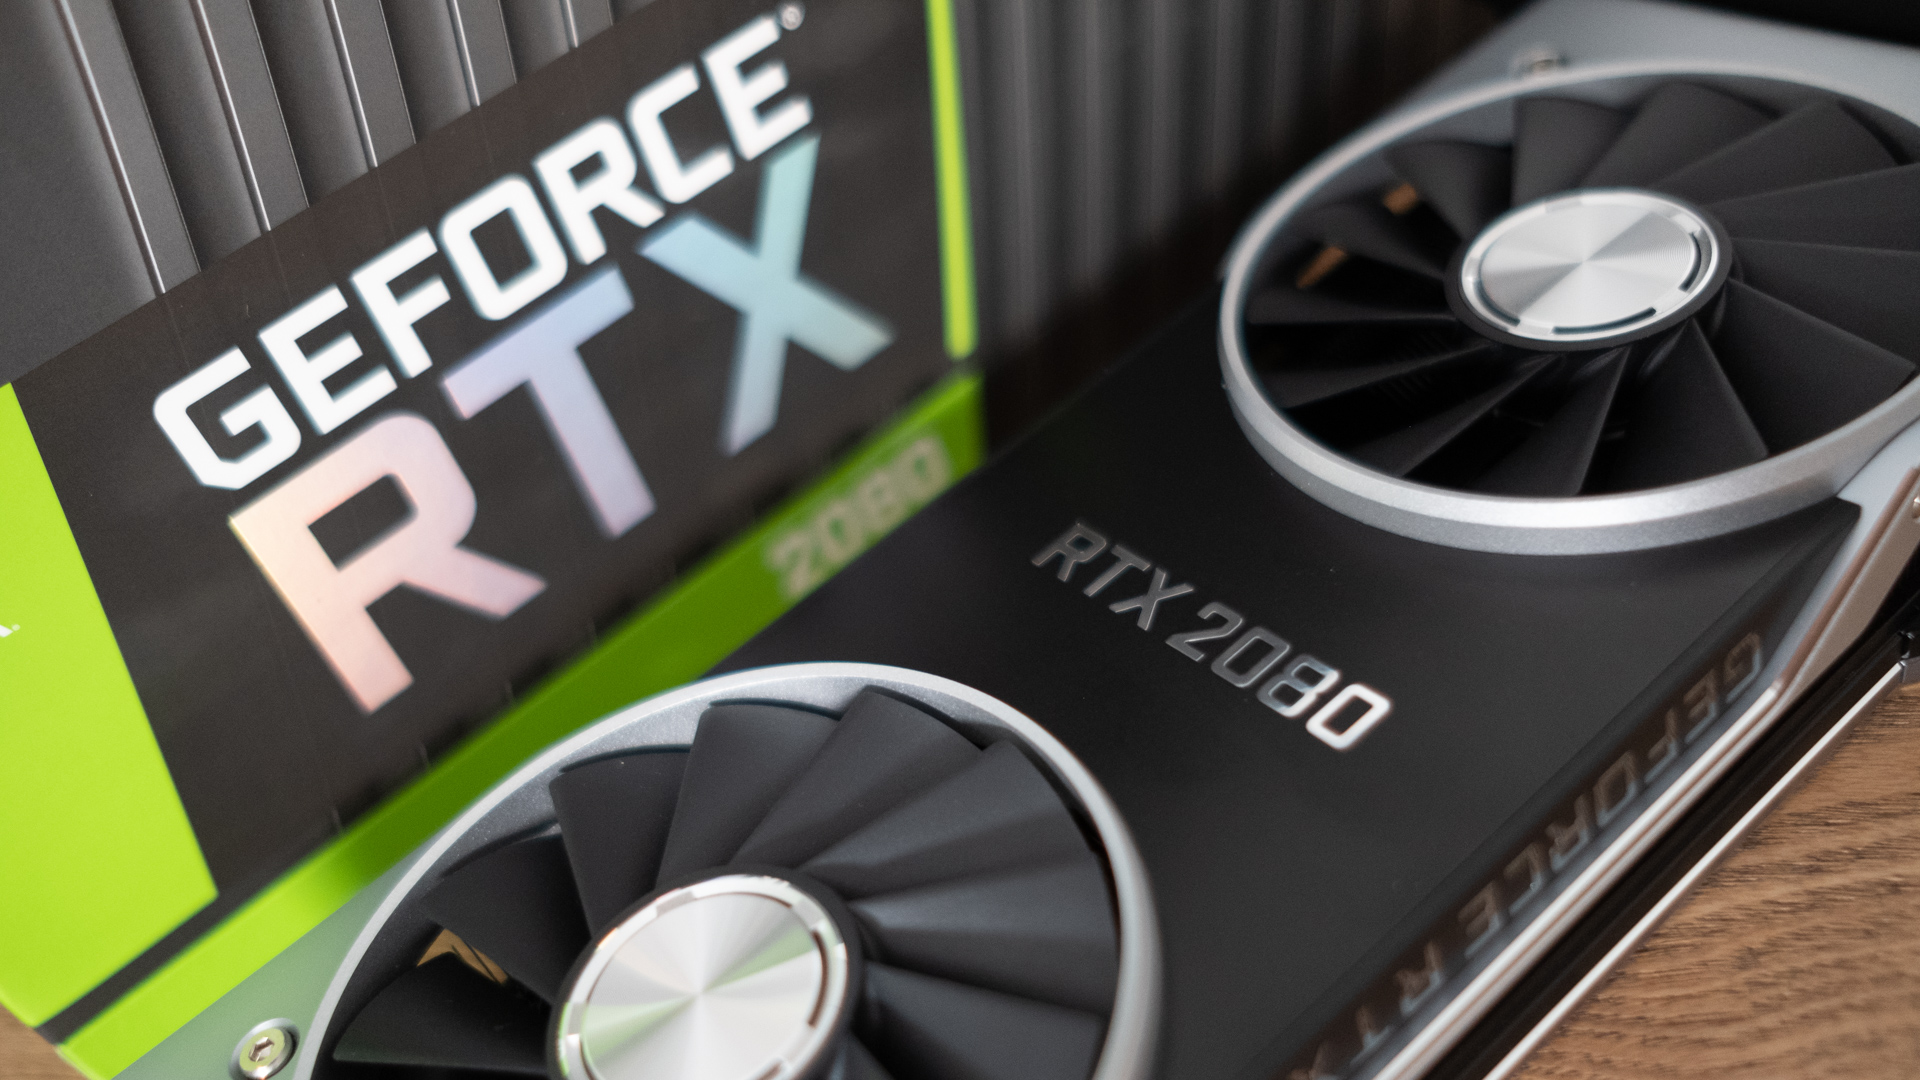 Best Nvidia graphics cards